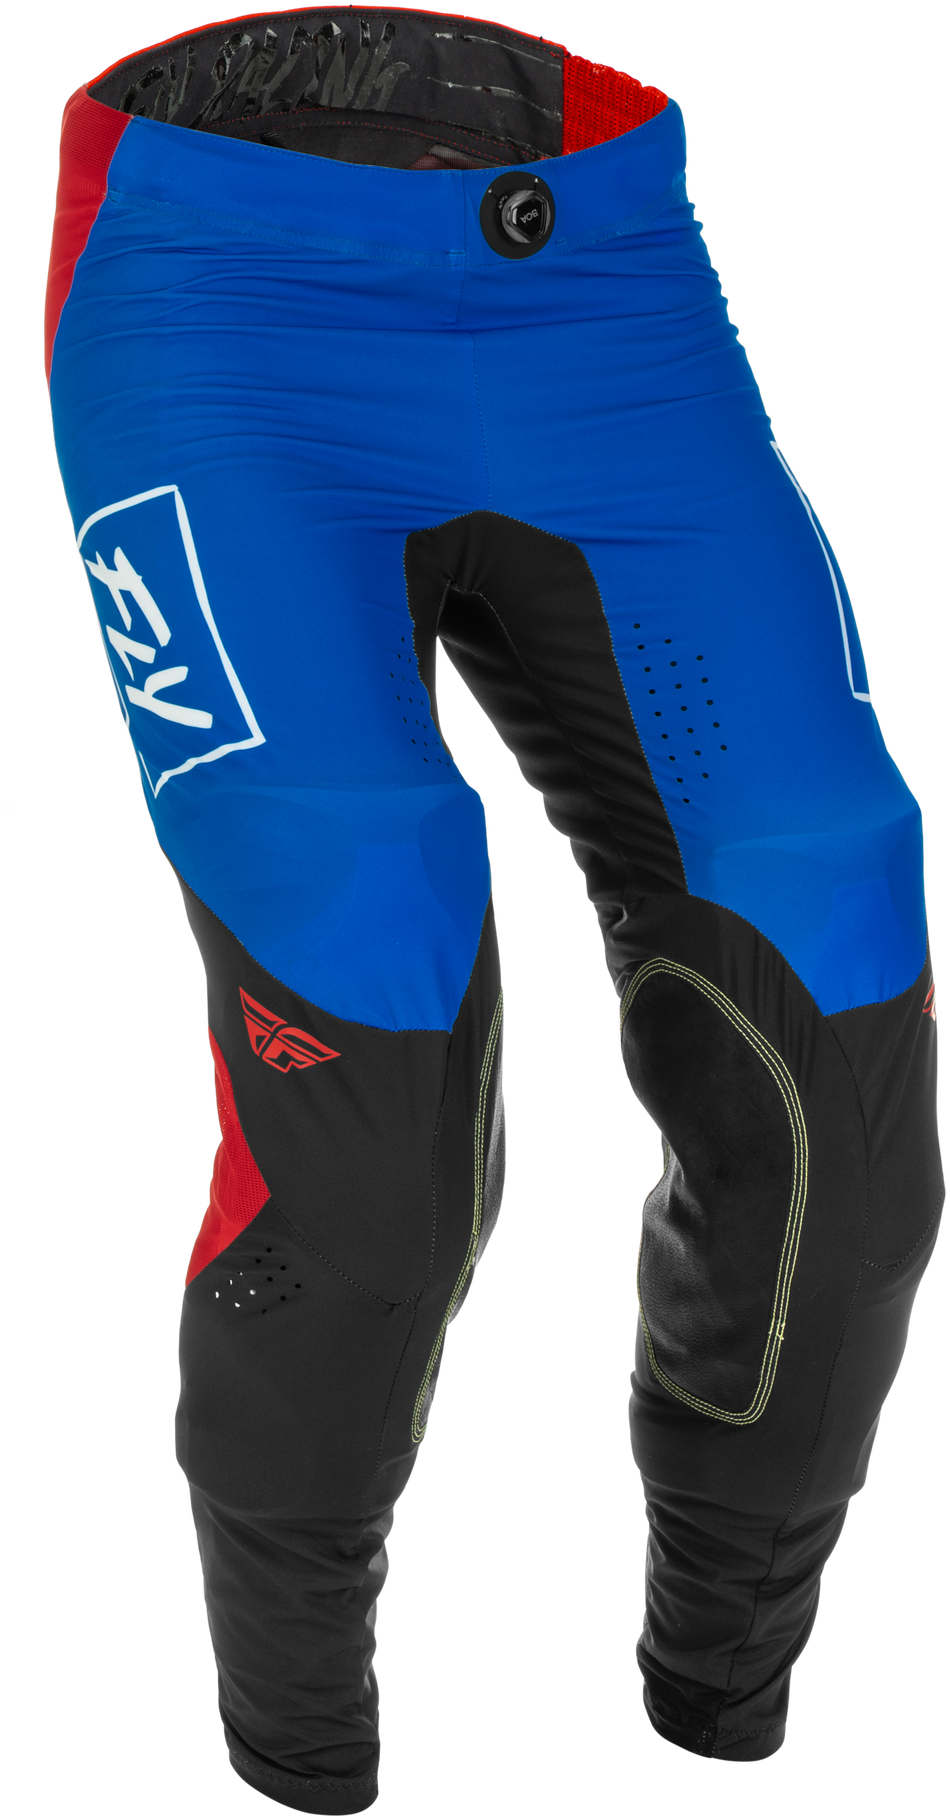 FLY RACING Lite Pants Red/White/Blue Size 36 375-73336